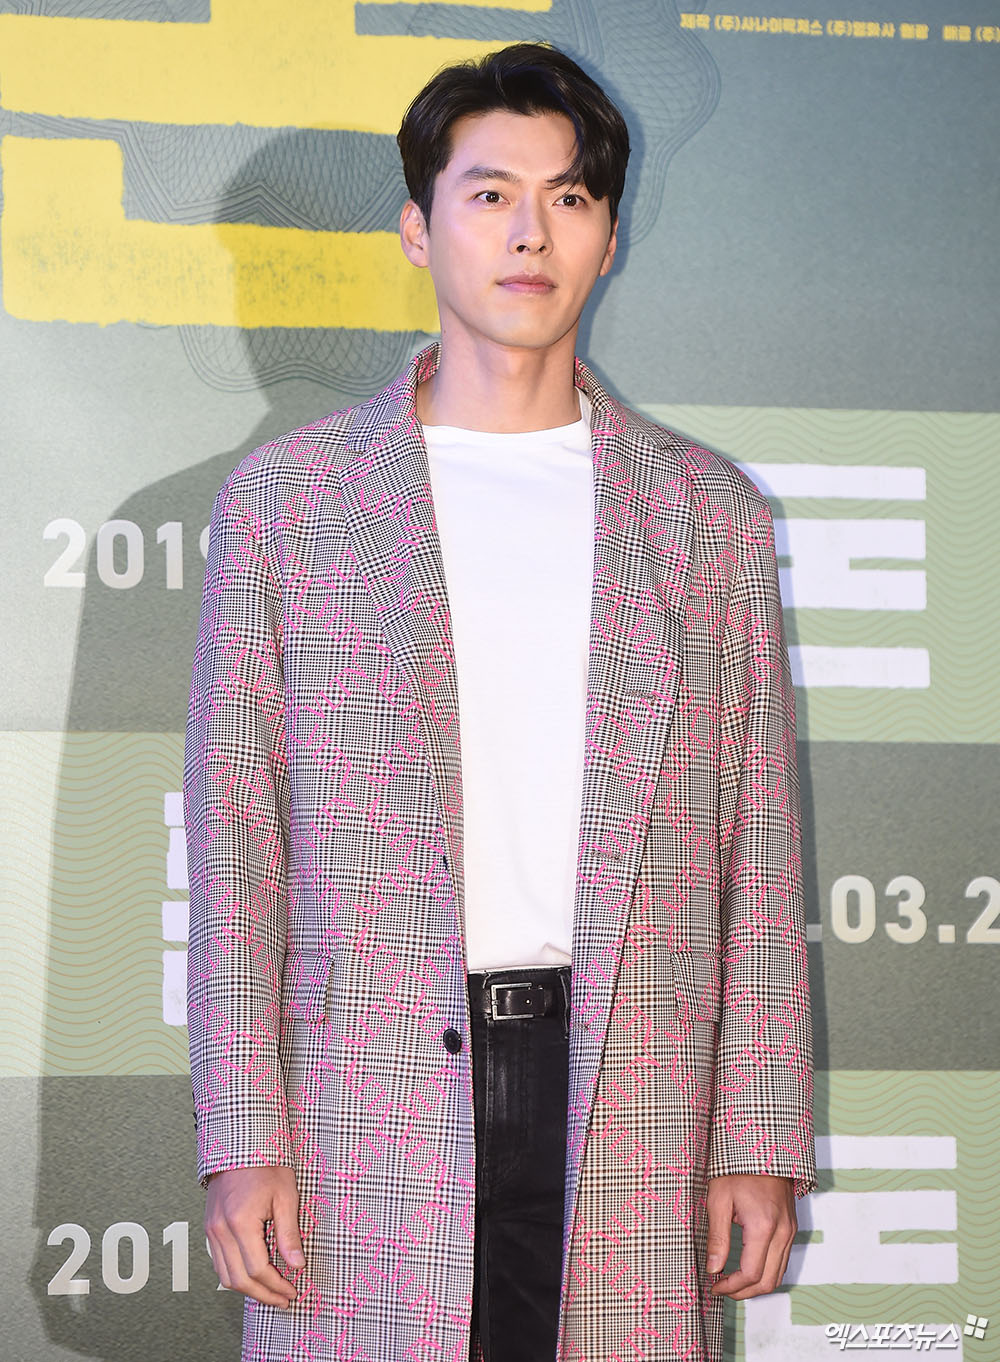 Actor Hyun Bin, who attended the VIP premiere of the movie Don held at Megabox COEX in Seoul, Seoul on the afternoon of the 18th, is posing.